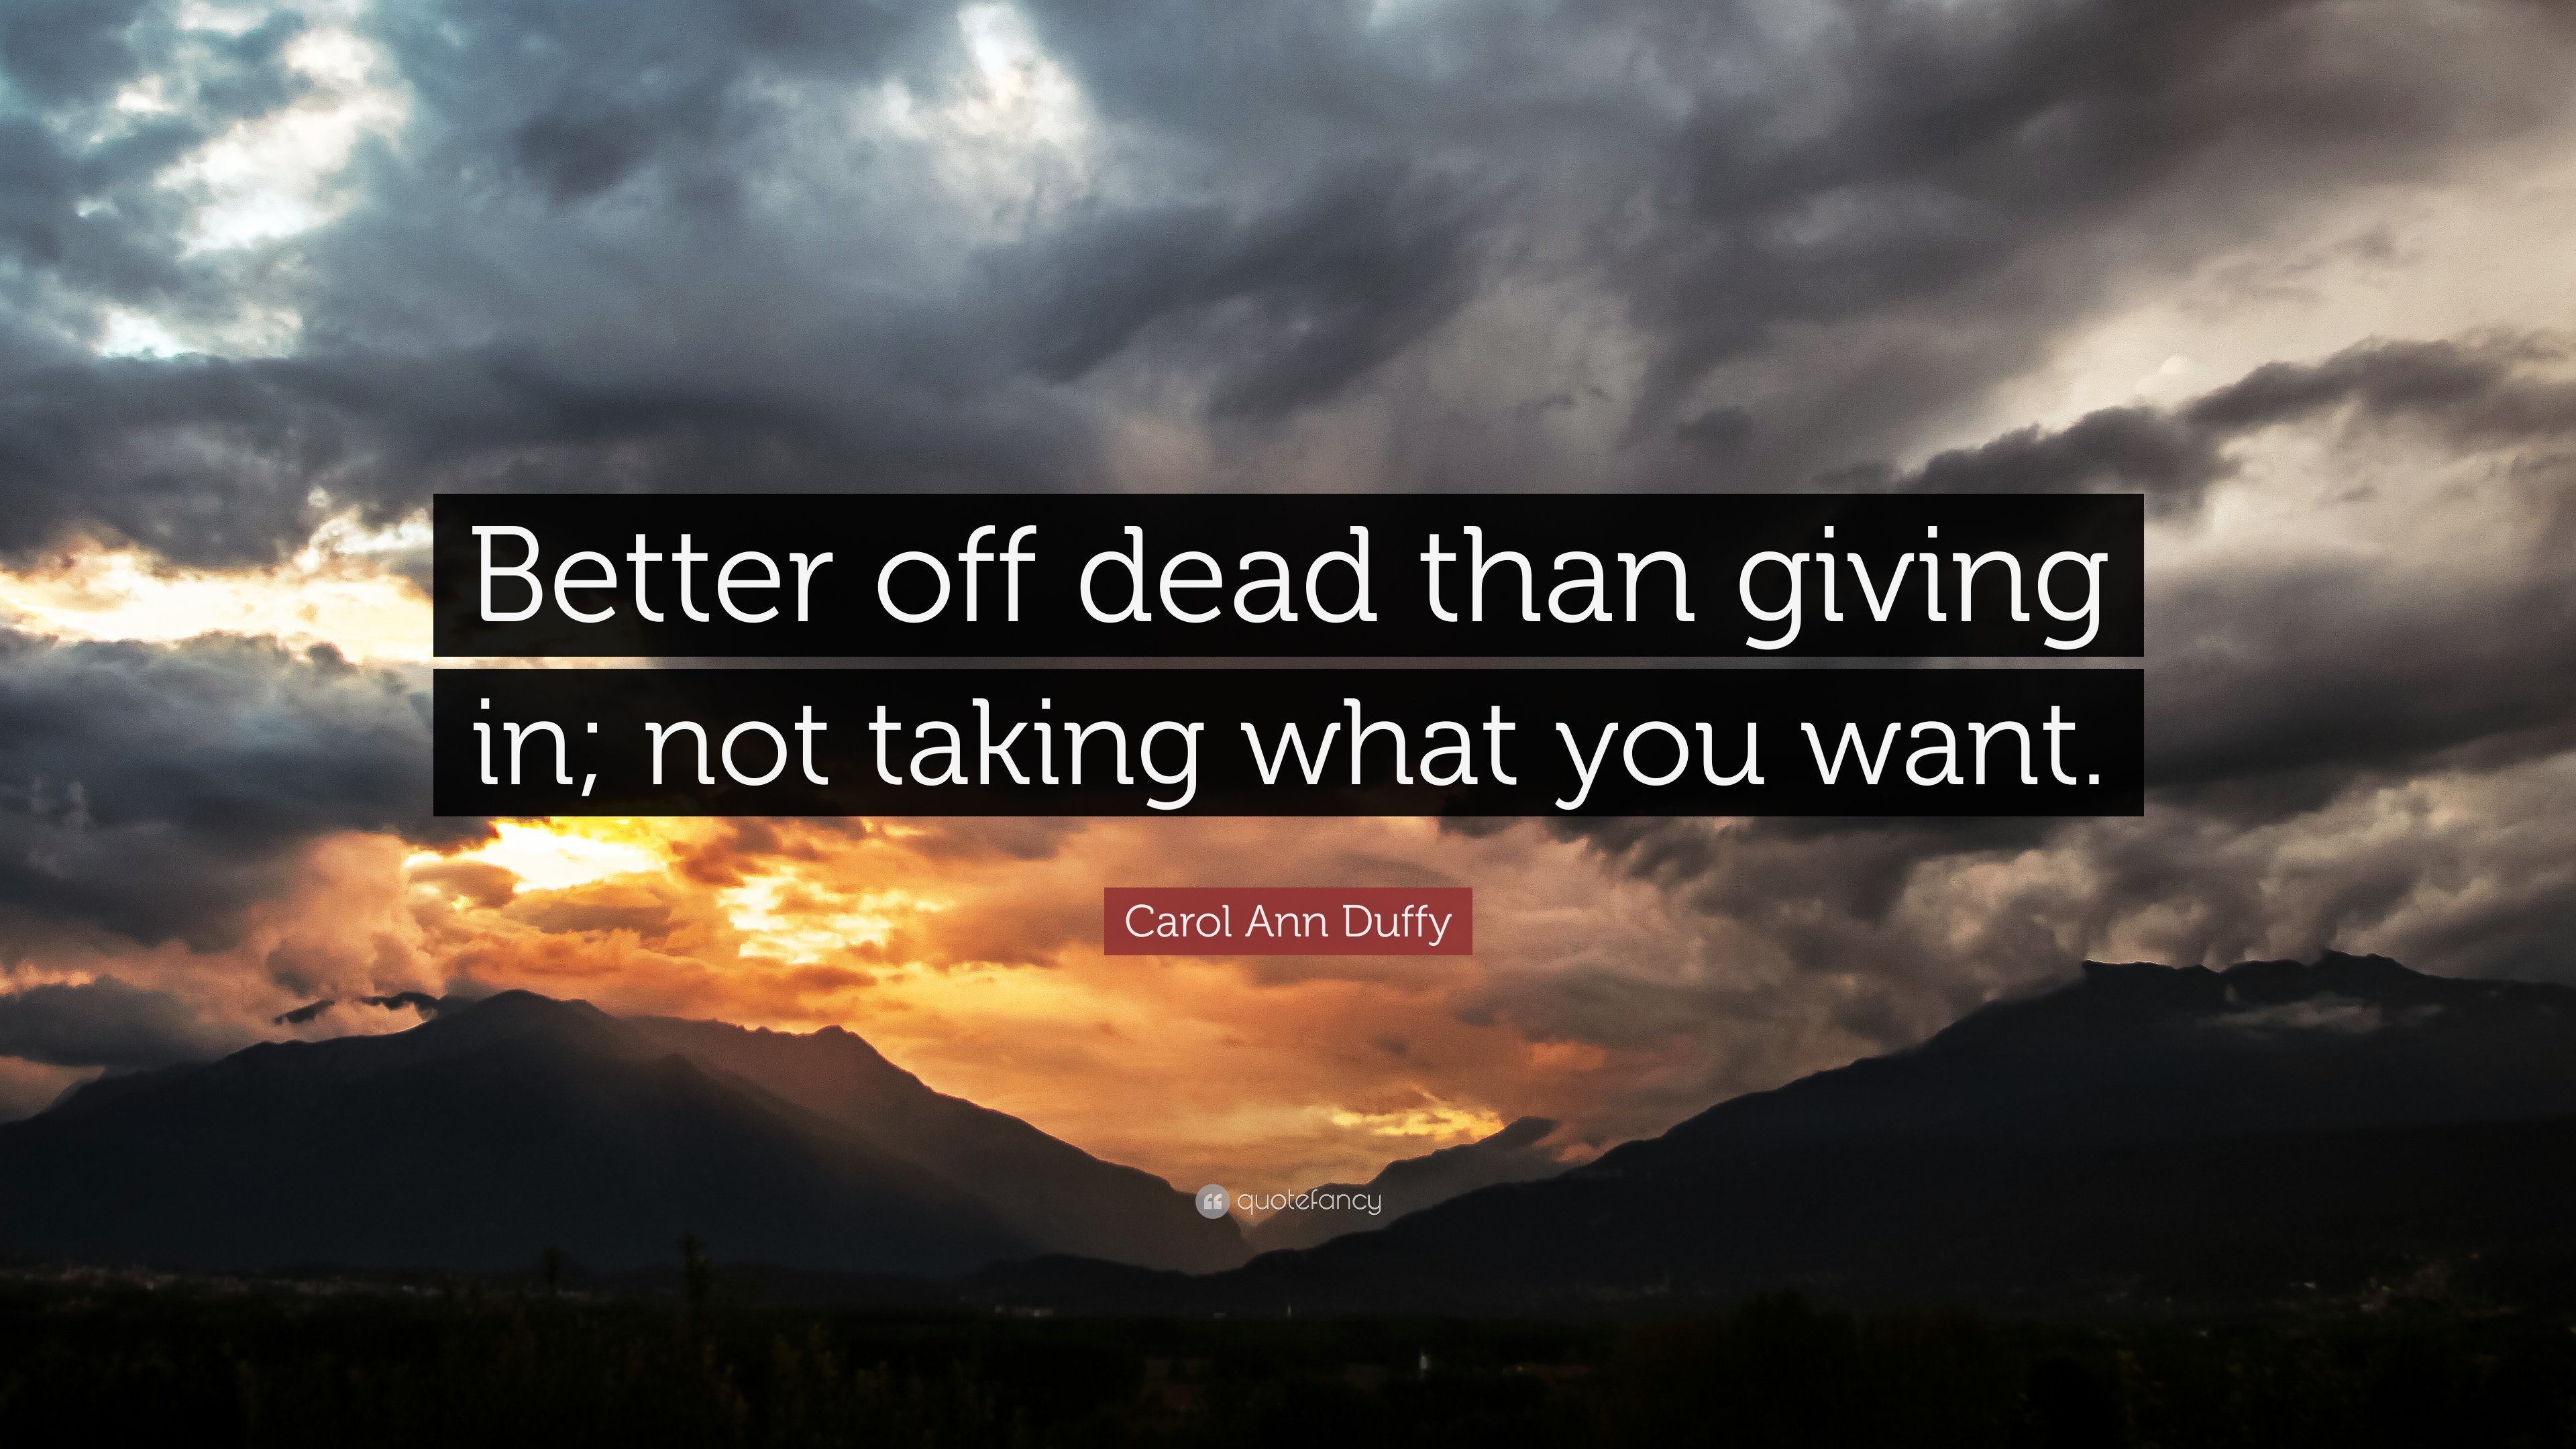 Carol Ann Duffy Quote: “Better off dead than giving in; not taking what you want.”